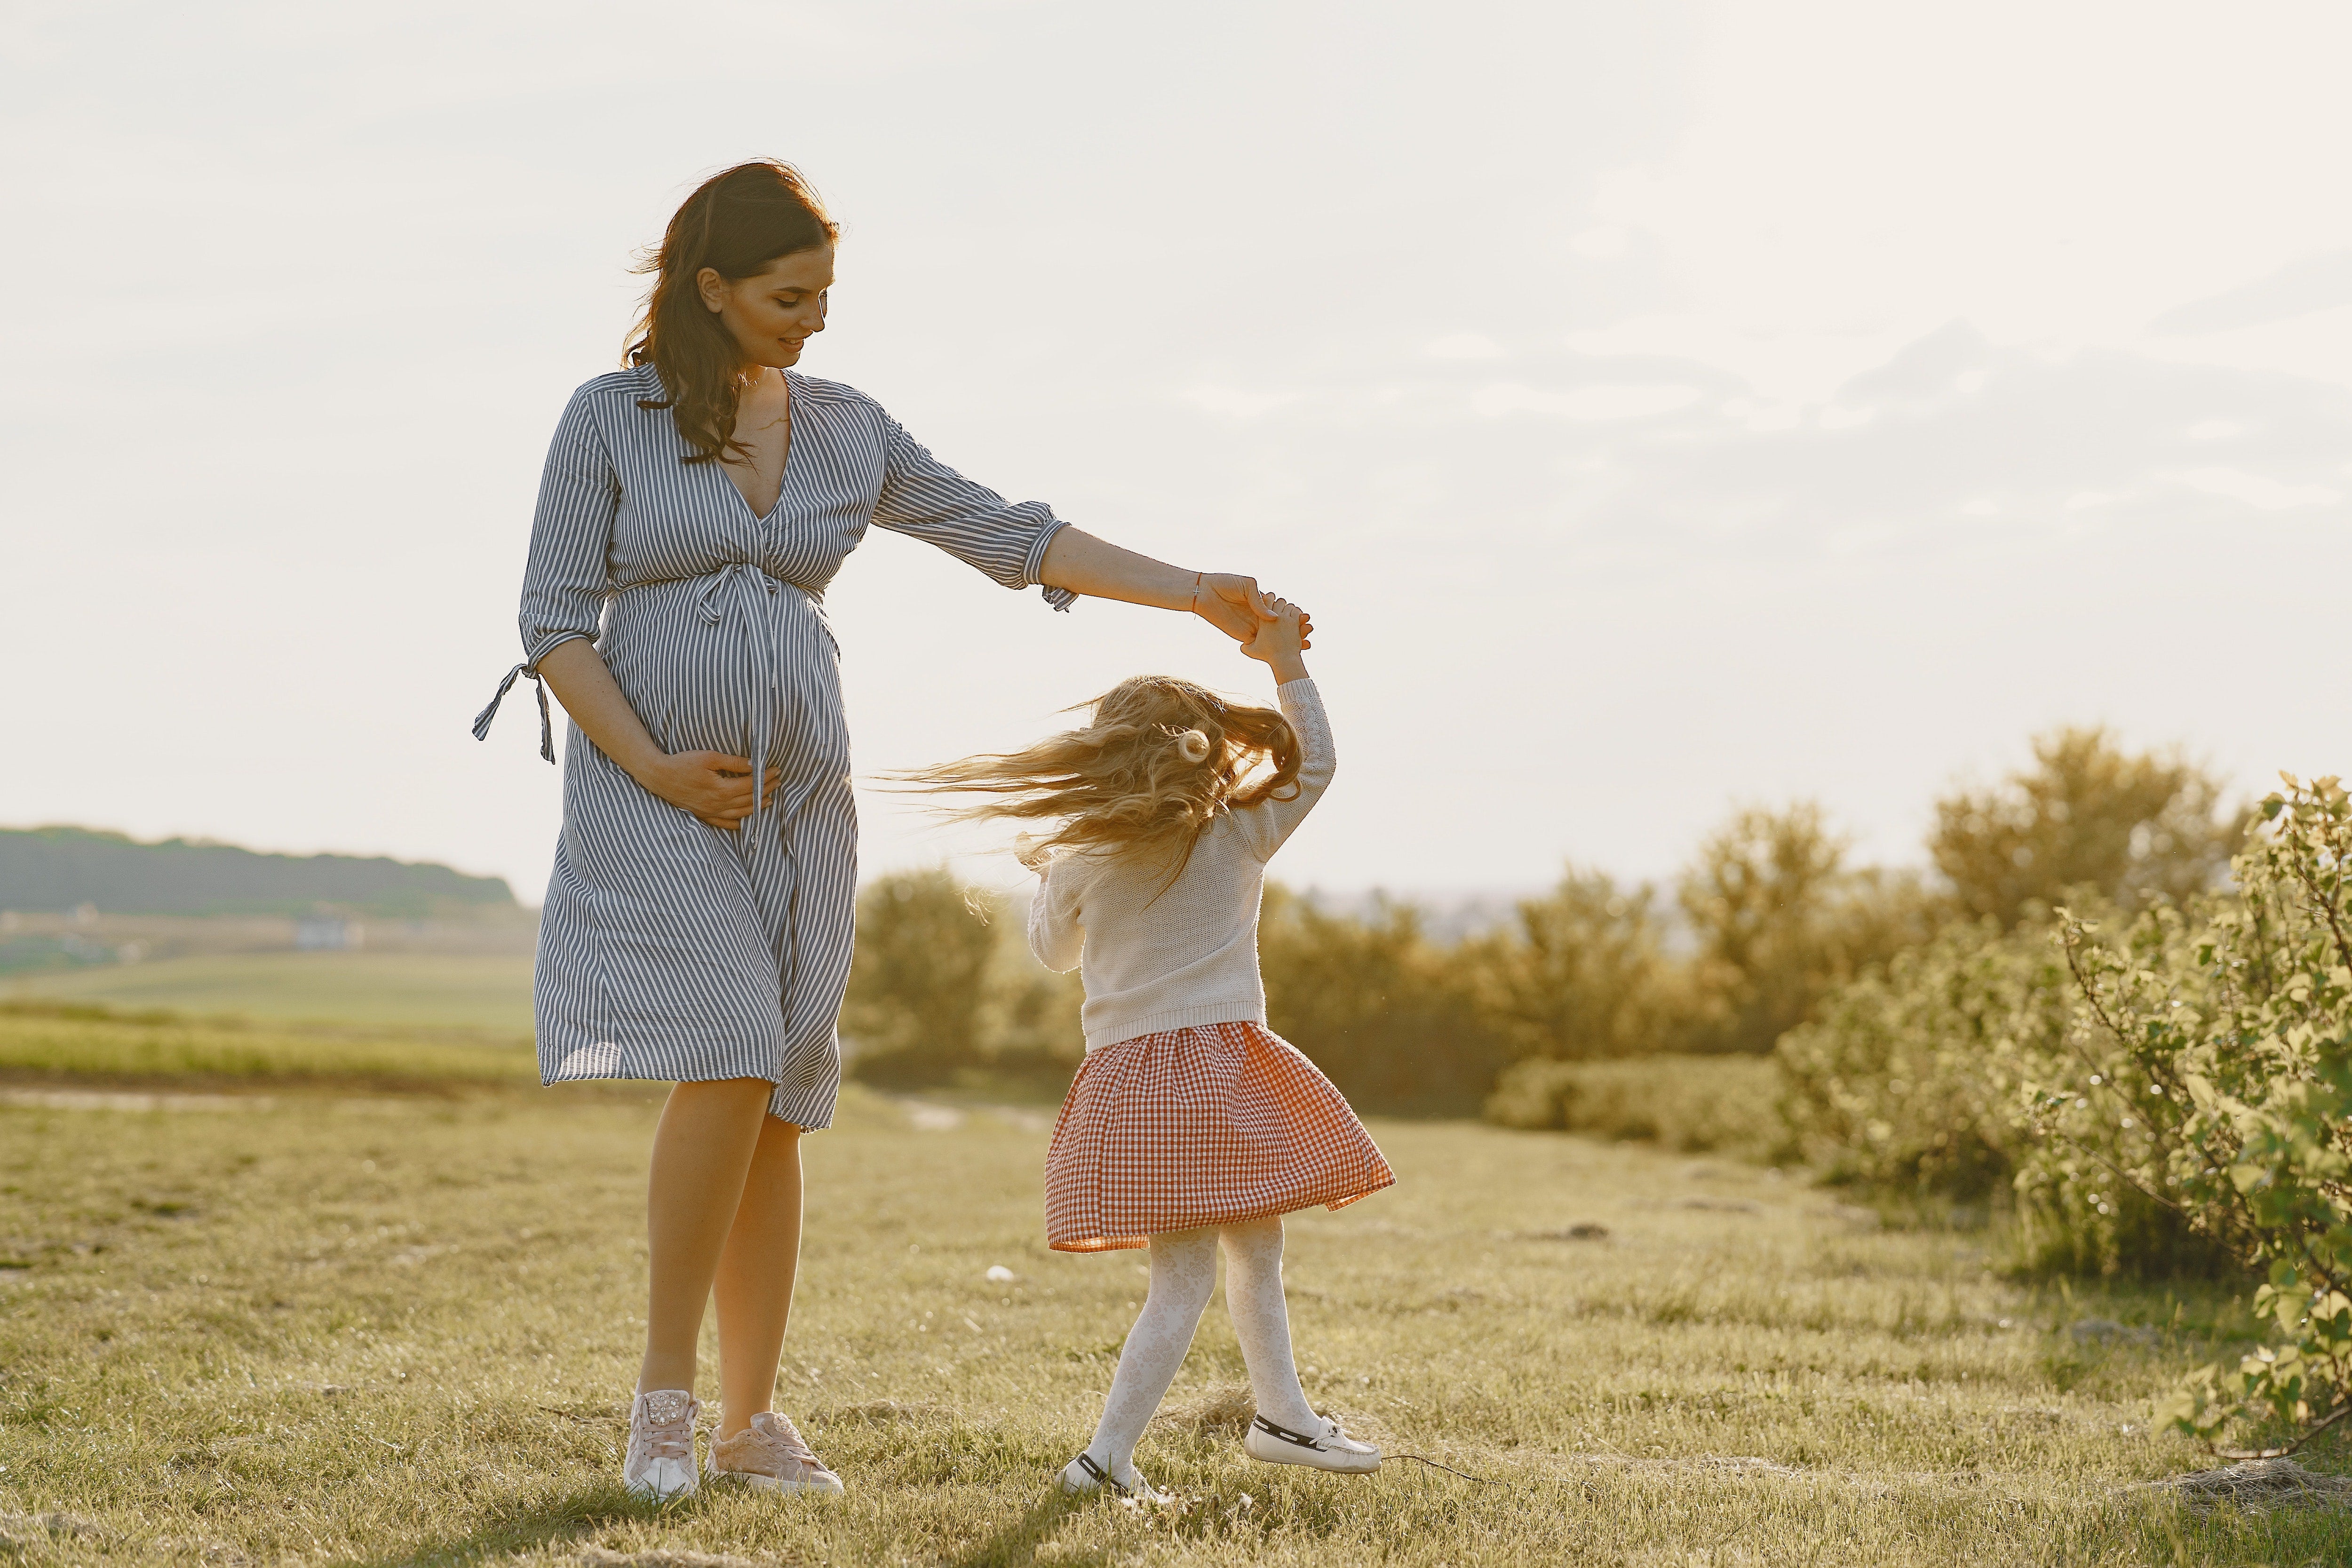 Pregnant mother twirling her daughter in a field of grass